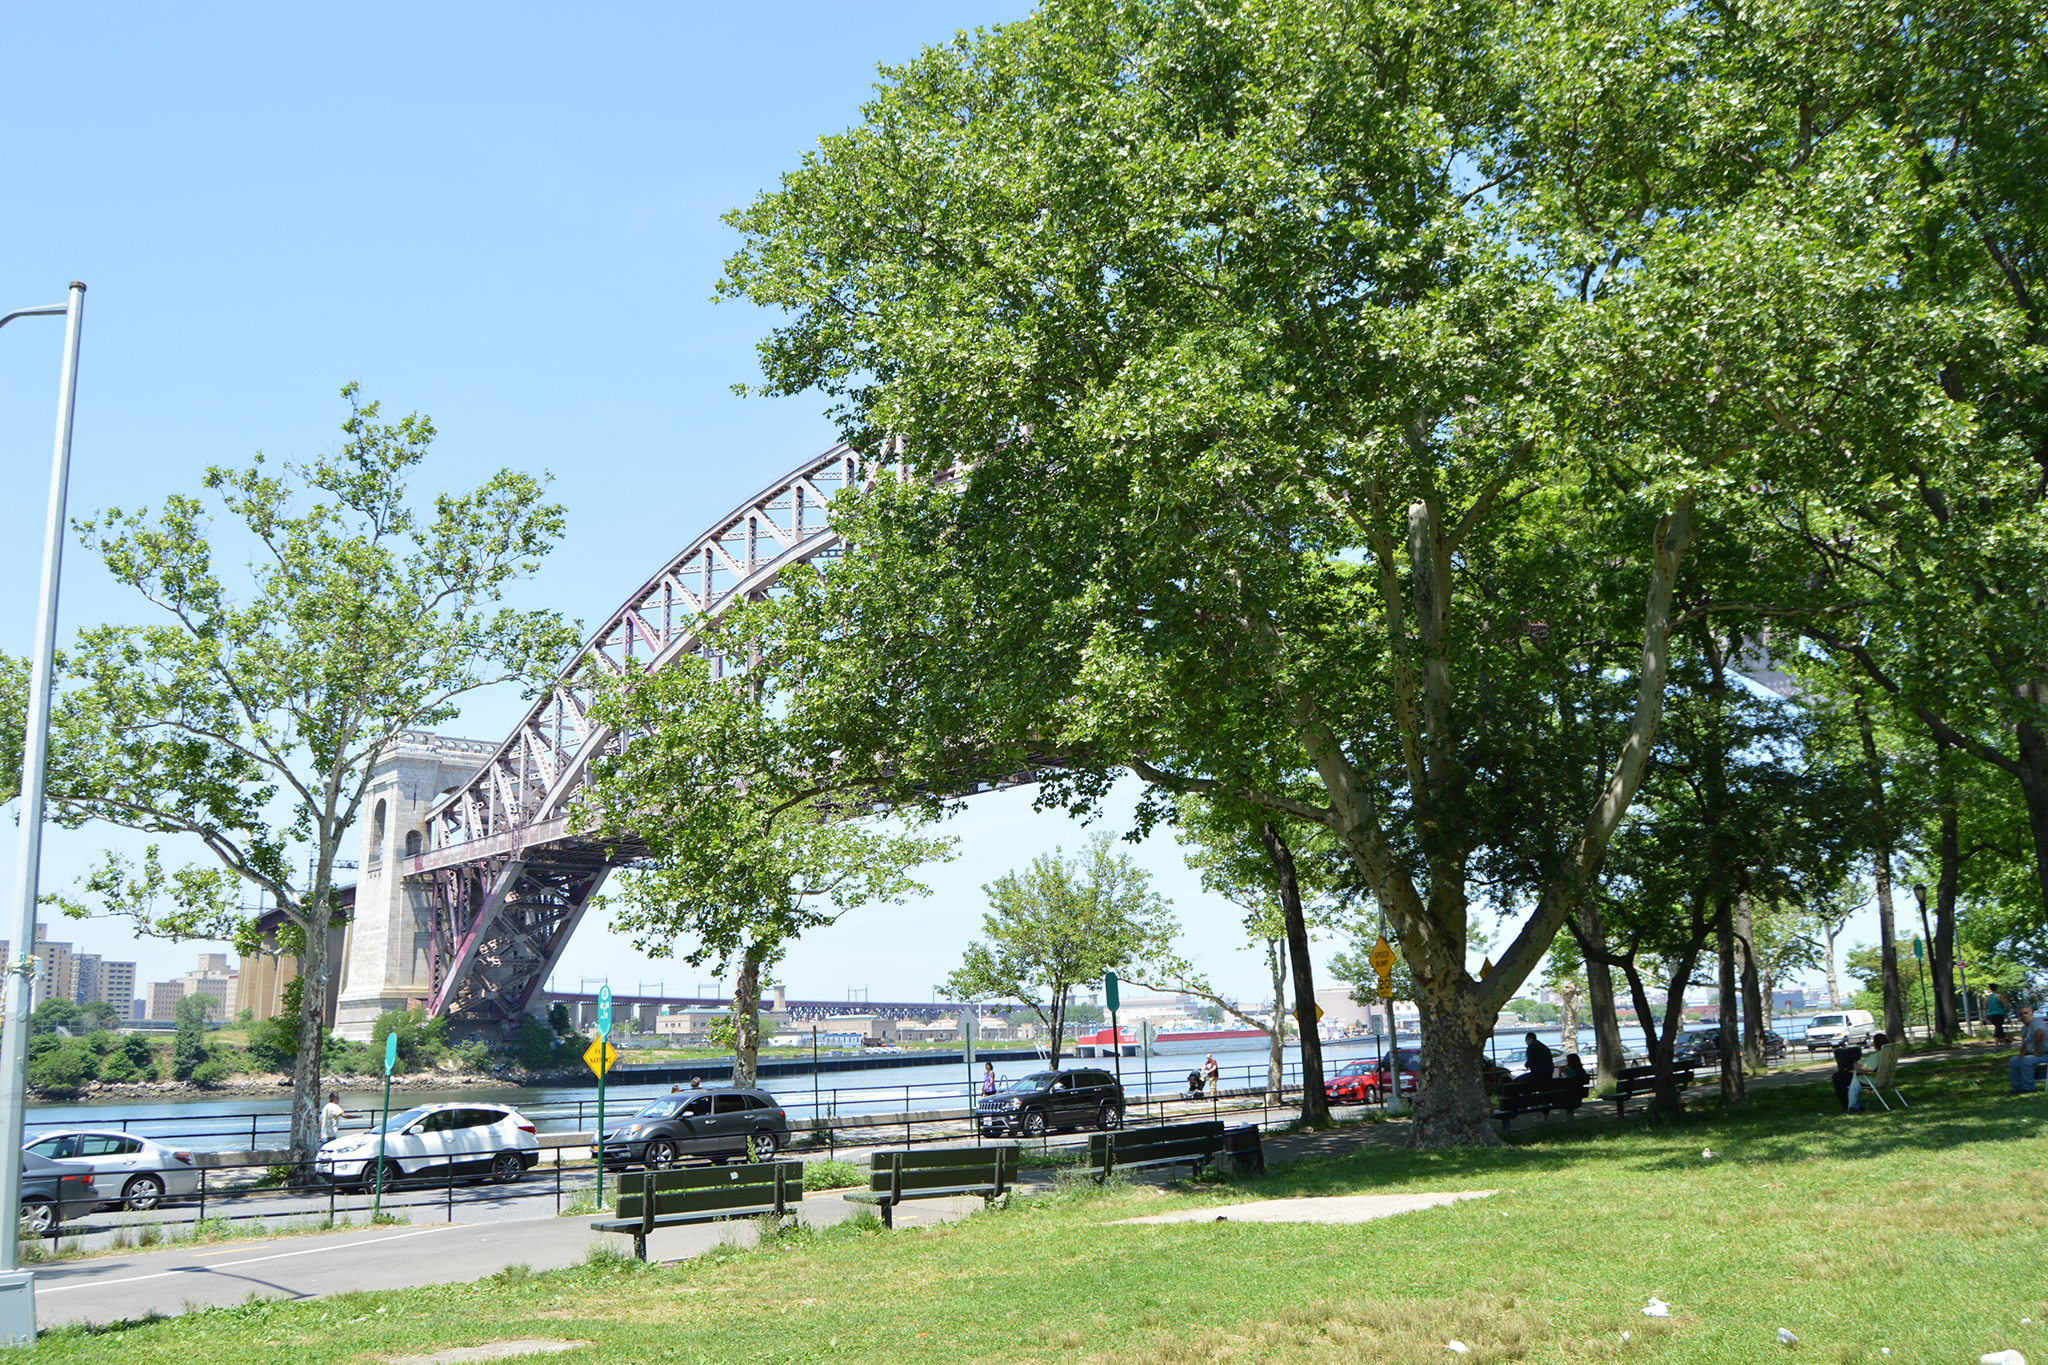 Astoria, Queens neighborhood guide including where to eat and drink